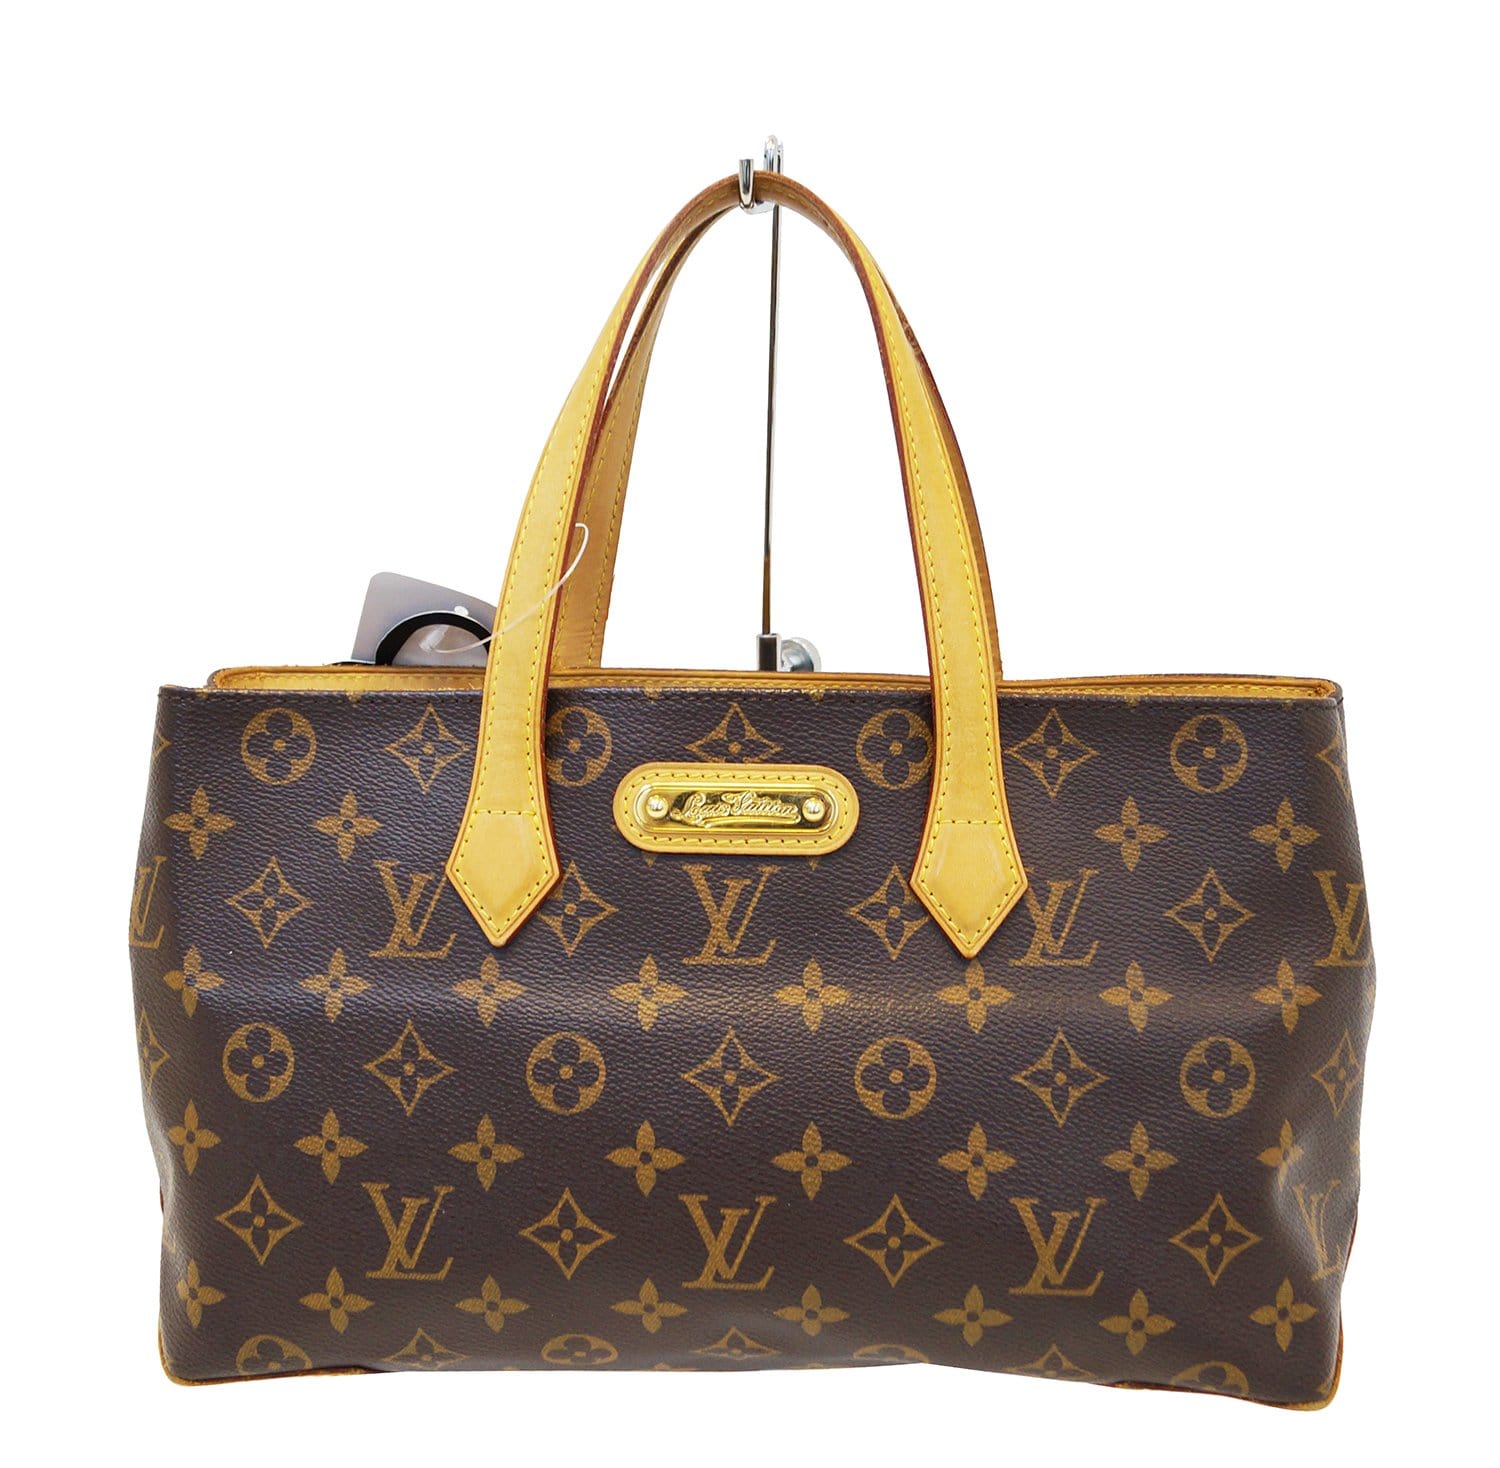 A Guide to Authenticating the Louis Vuitton Monogram Wilshire Purse  (Authenticating Louis Vuitton) - Kindle edition by Republic, Resale, Weis,  Molly. Arts & Photography Kindle eBooks @ .